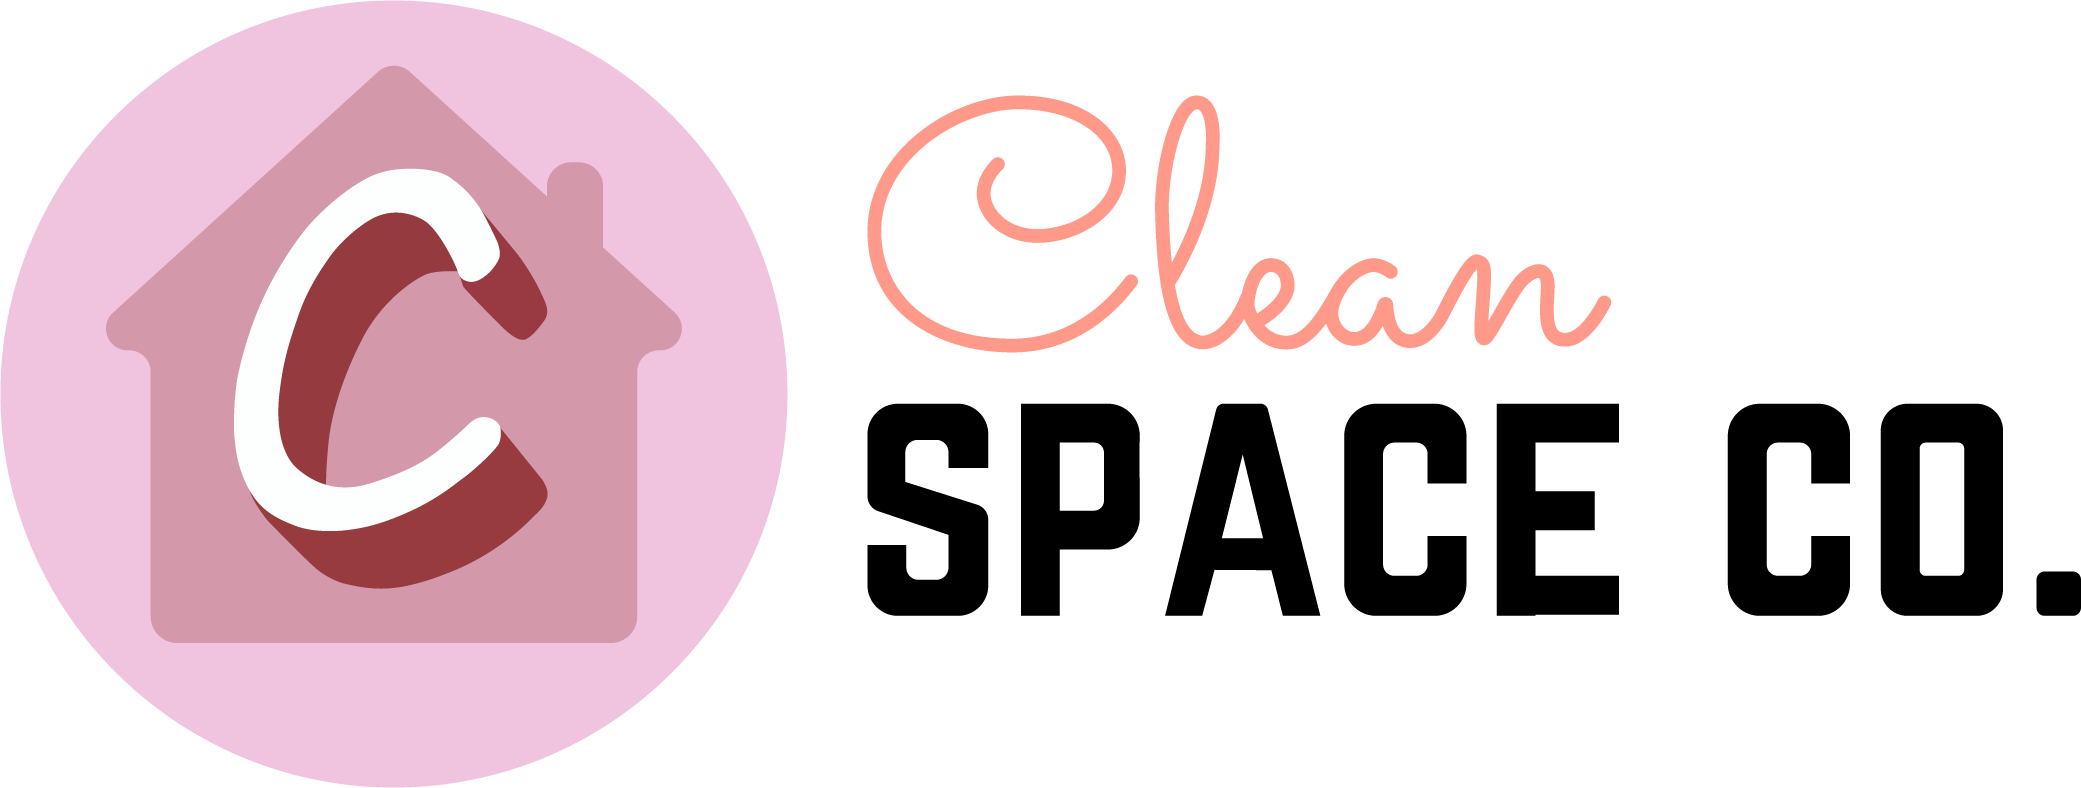 Clean Space Co